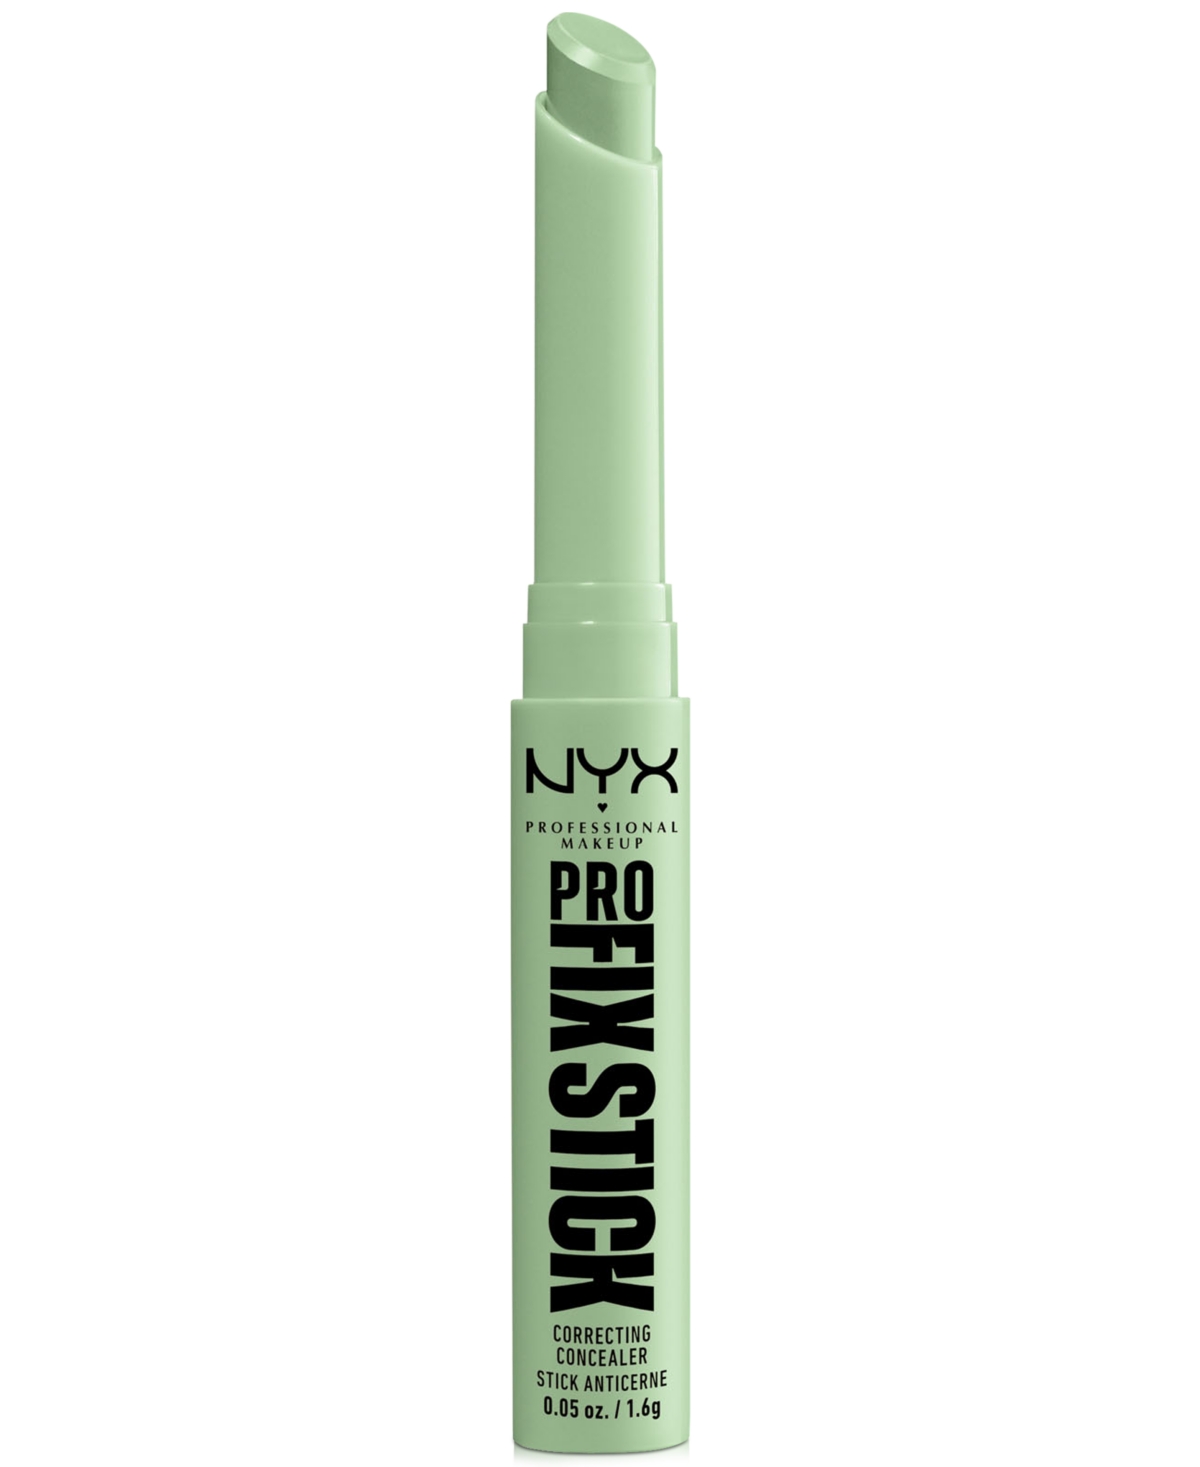 Nyx Professional Makeup Pro Fix Stick Correcting Concealer, 0.05 Oz. In Green